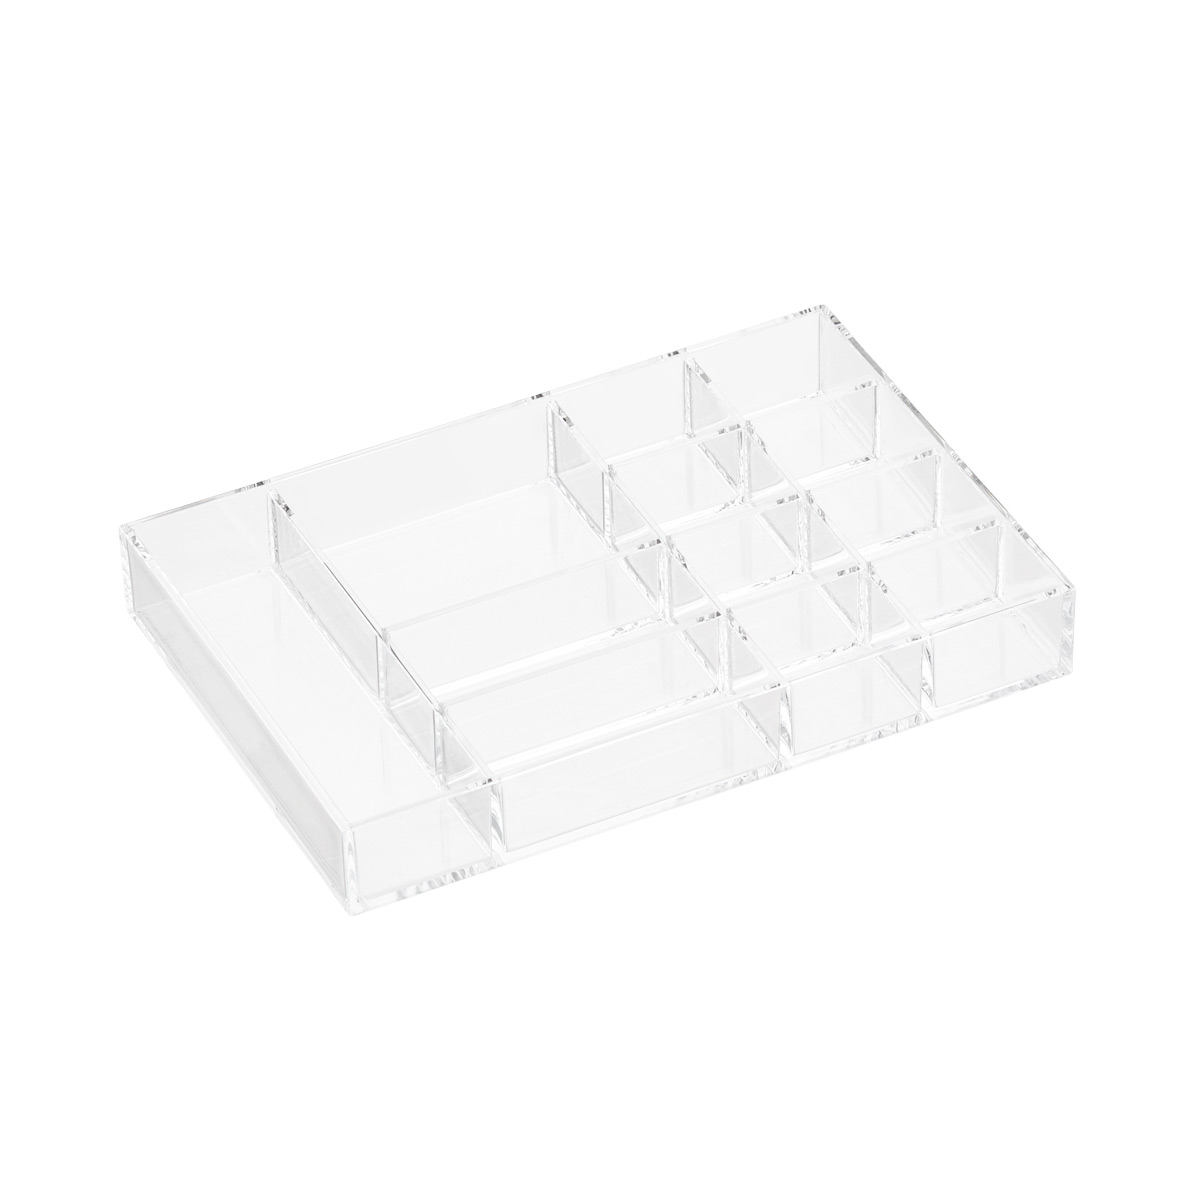 https://www.containerstore.com/catalogimages/336339/10050347-acrylic-12-section-stacking.jpg